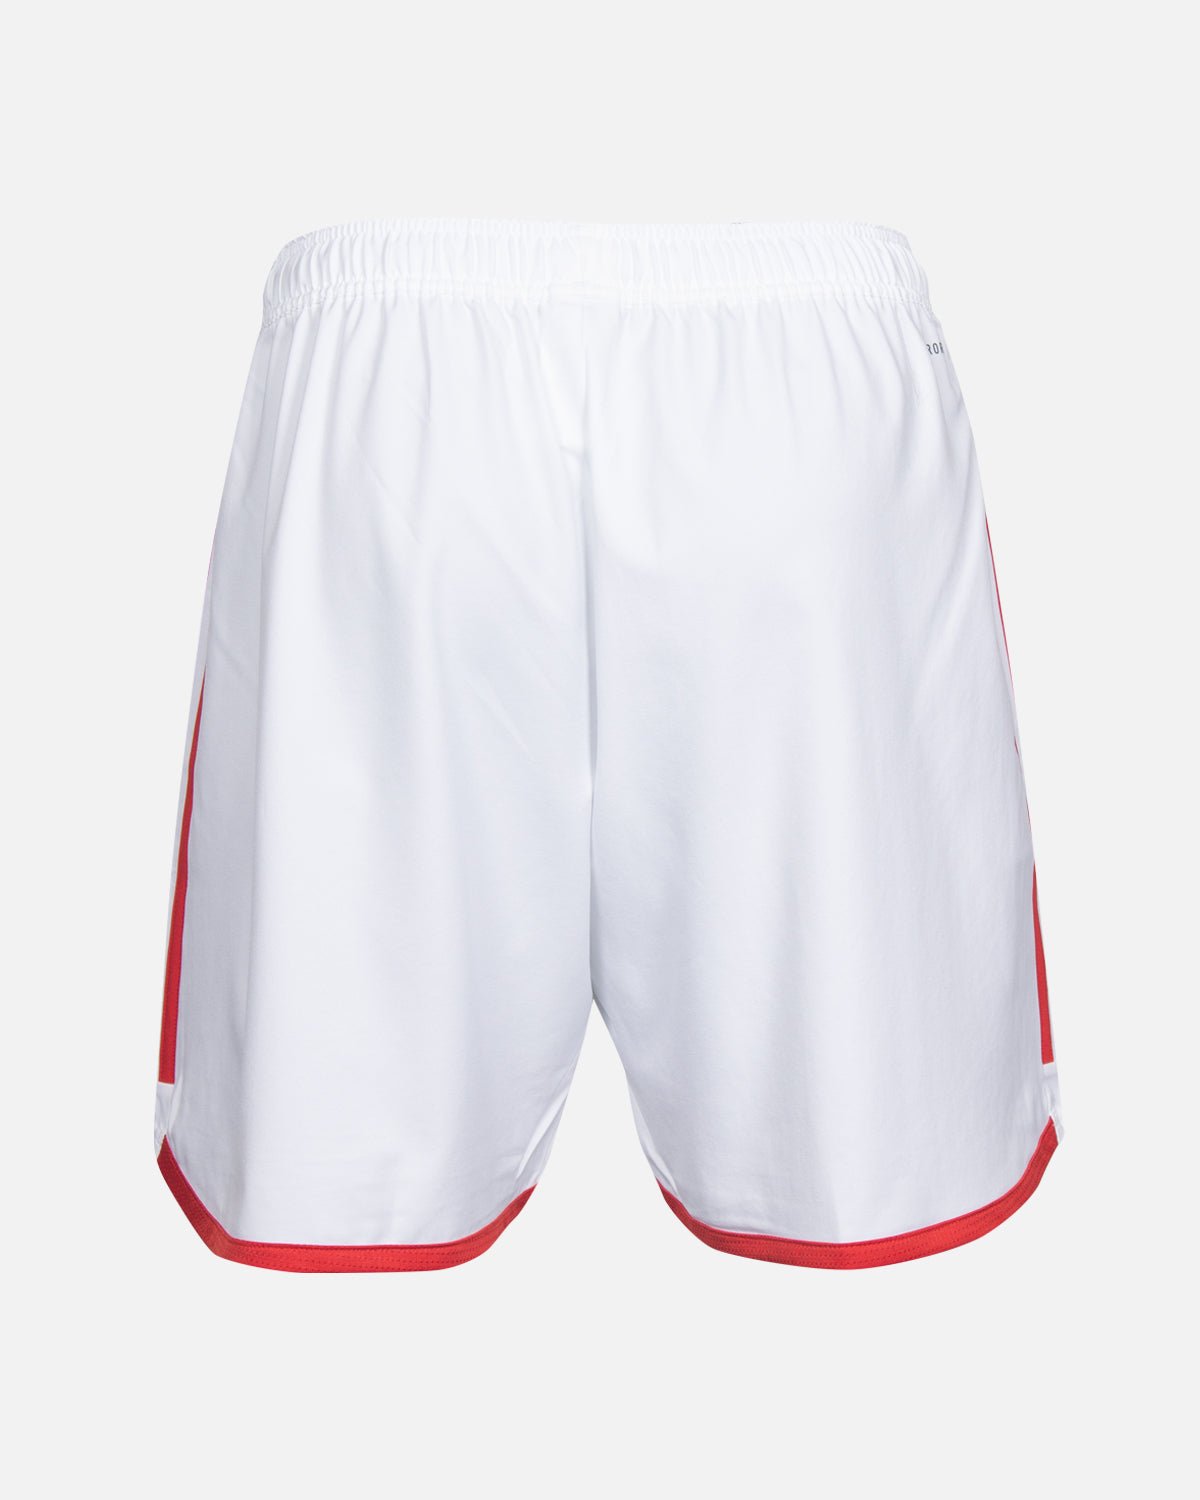 NFFC Home Shorts 23-24 - Nottingham Forest FC